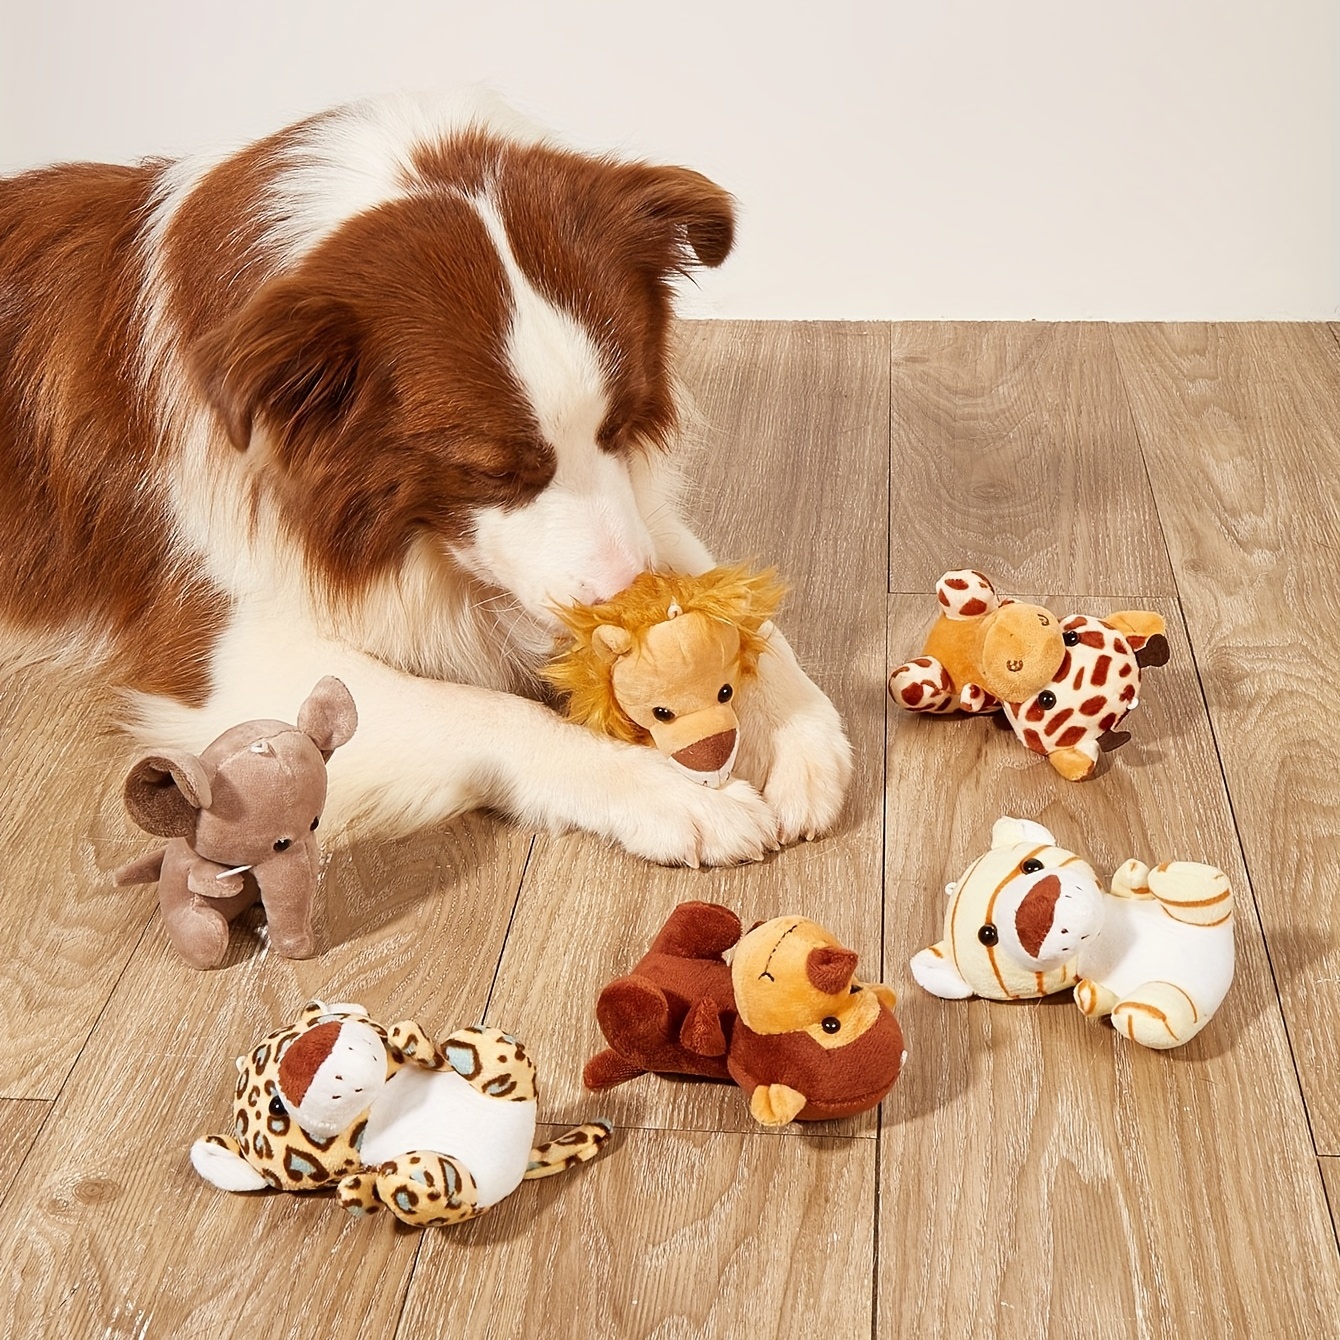 1pc Pet Dog Toy, Bite Resistant, Plush Cartoon Toy With Sound For Dogs To  Play With And Enjoy